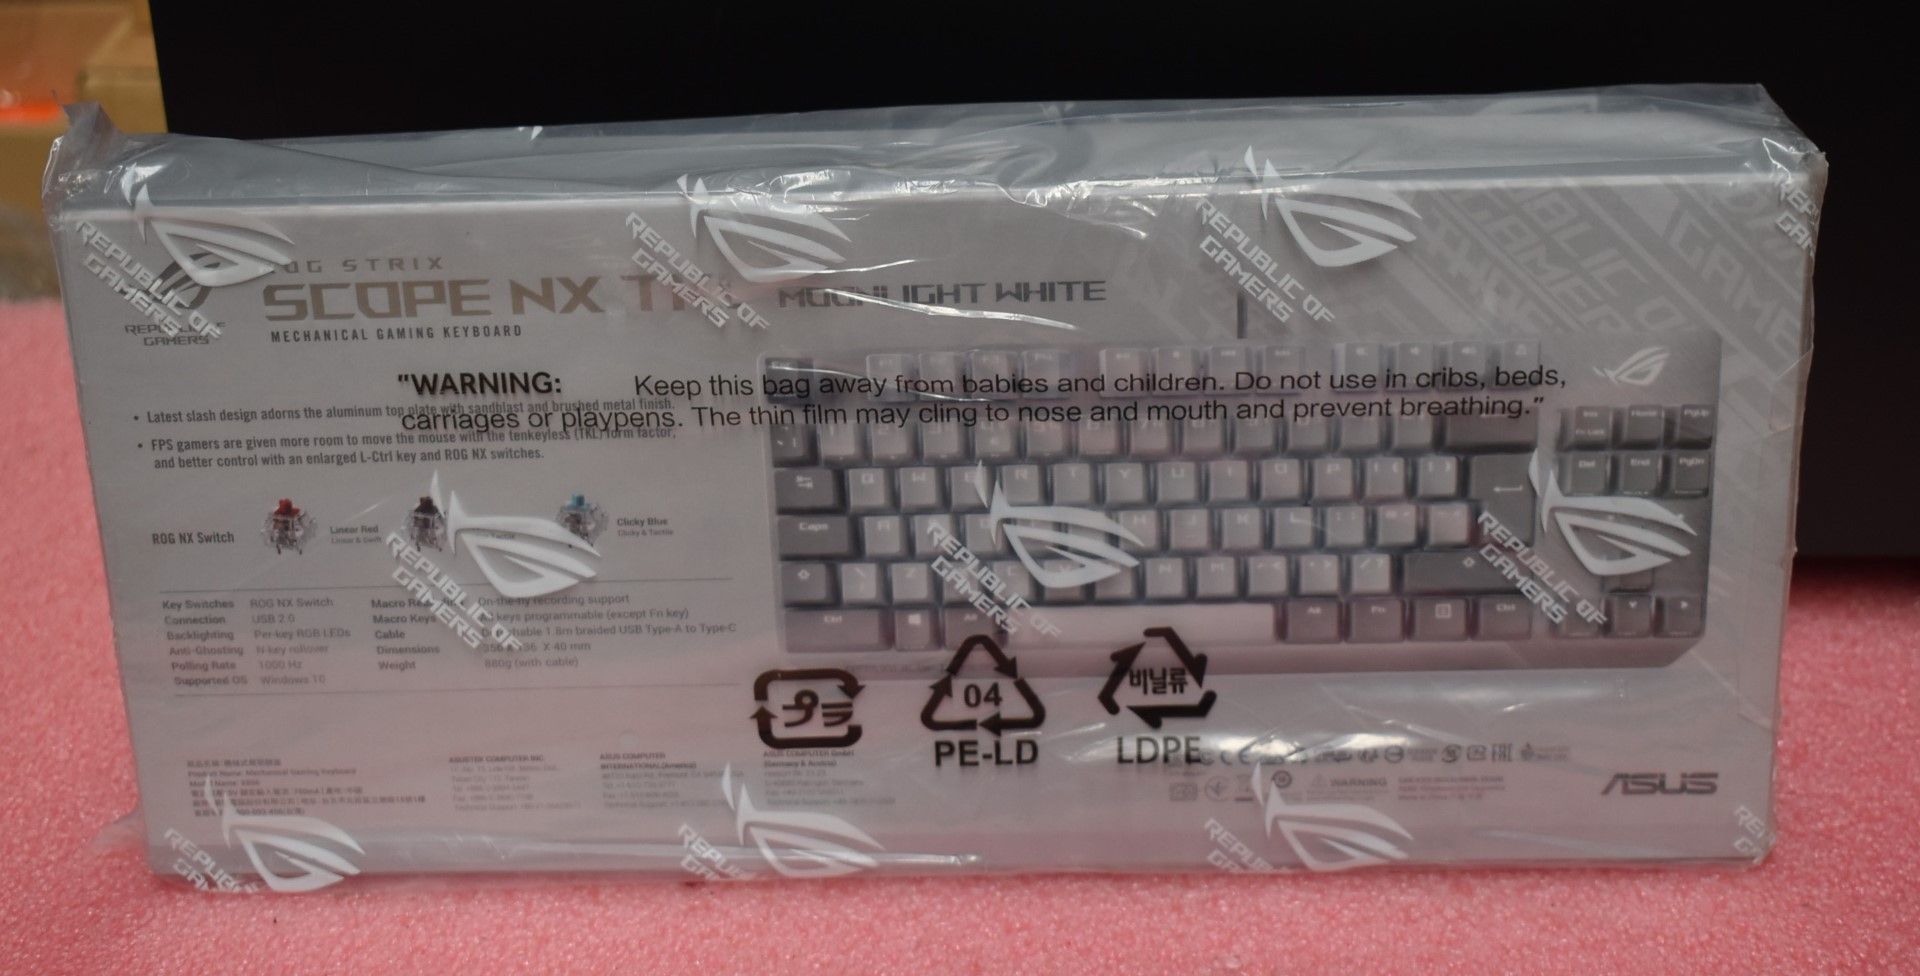 1 x Asus ROG Strix Scope NX TKL Moonlight White Wired Mechanical RGB Gaming Keyboard - Features - Image 5 of 6